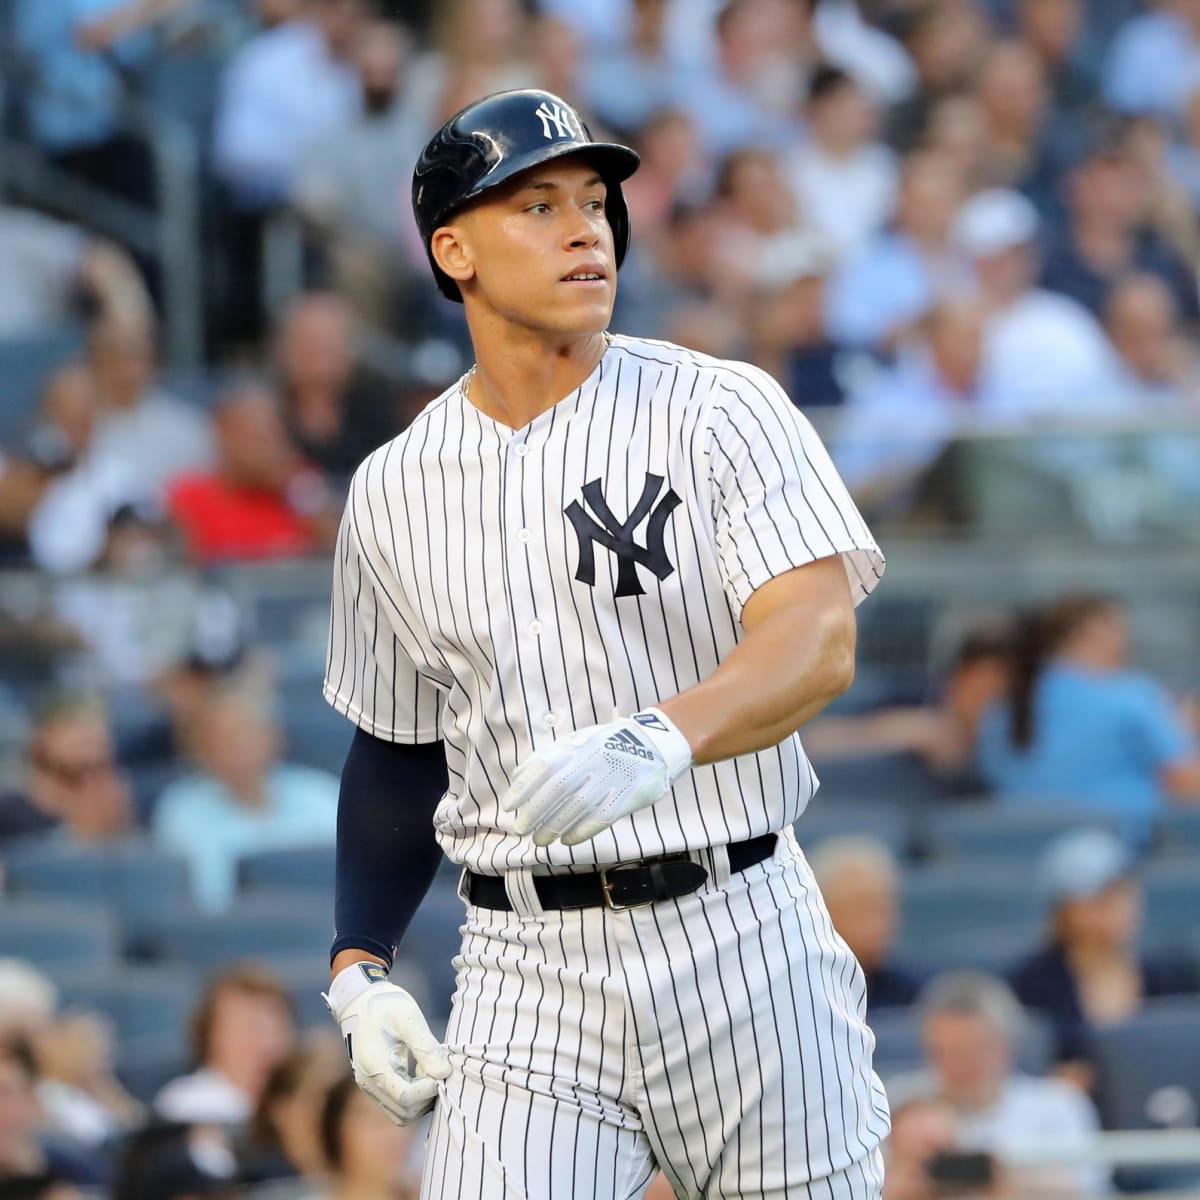 This Yankees cult hero is accomplishing feats not seen since Barry Bonds